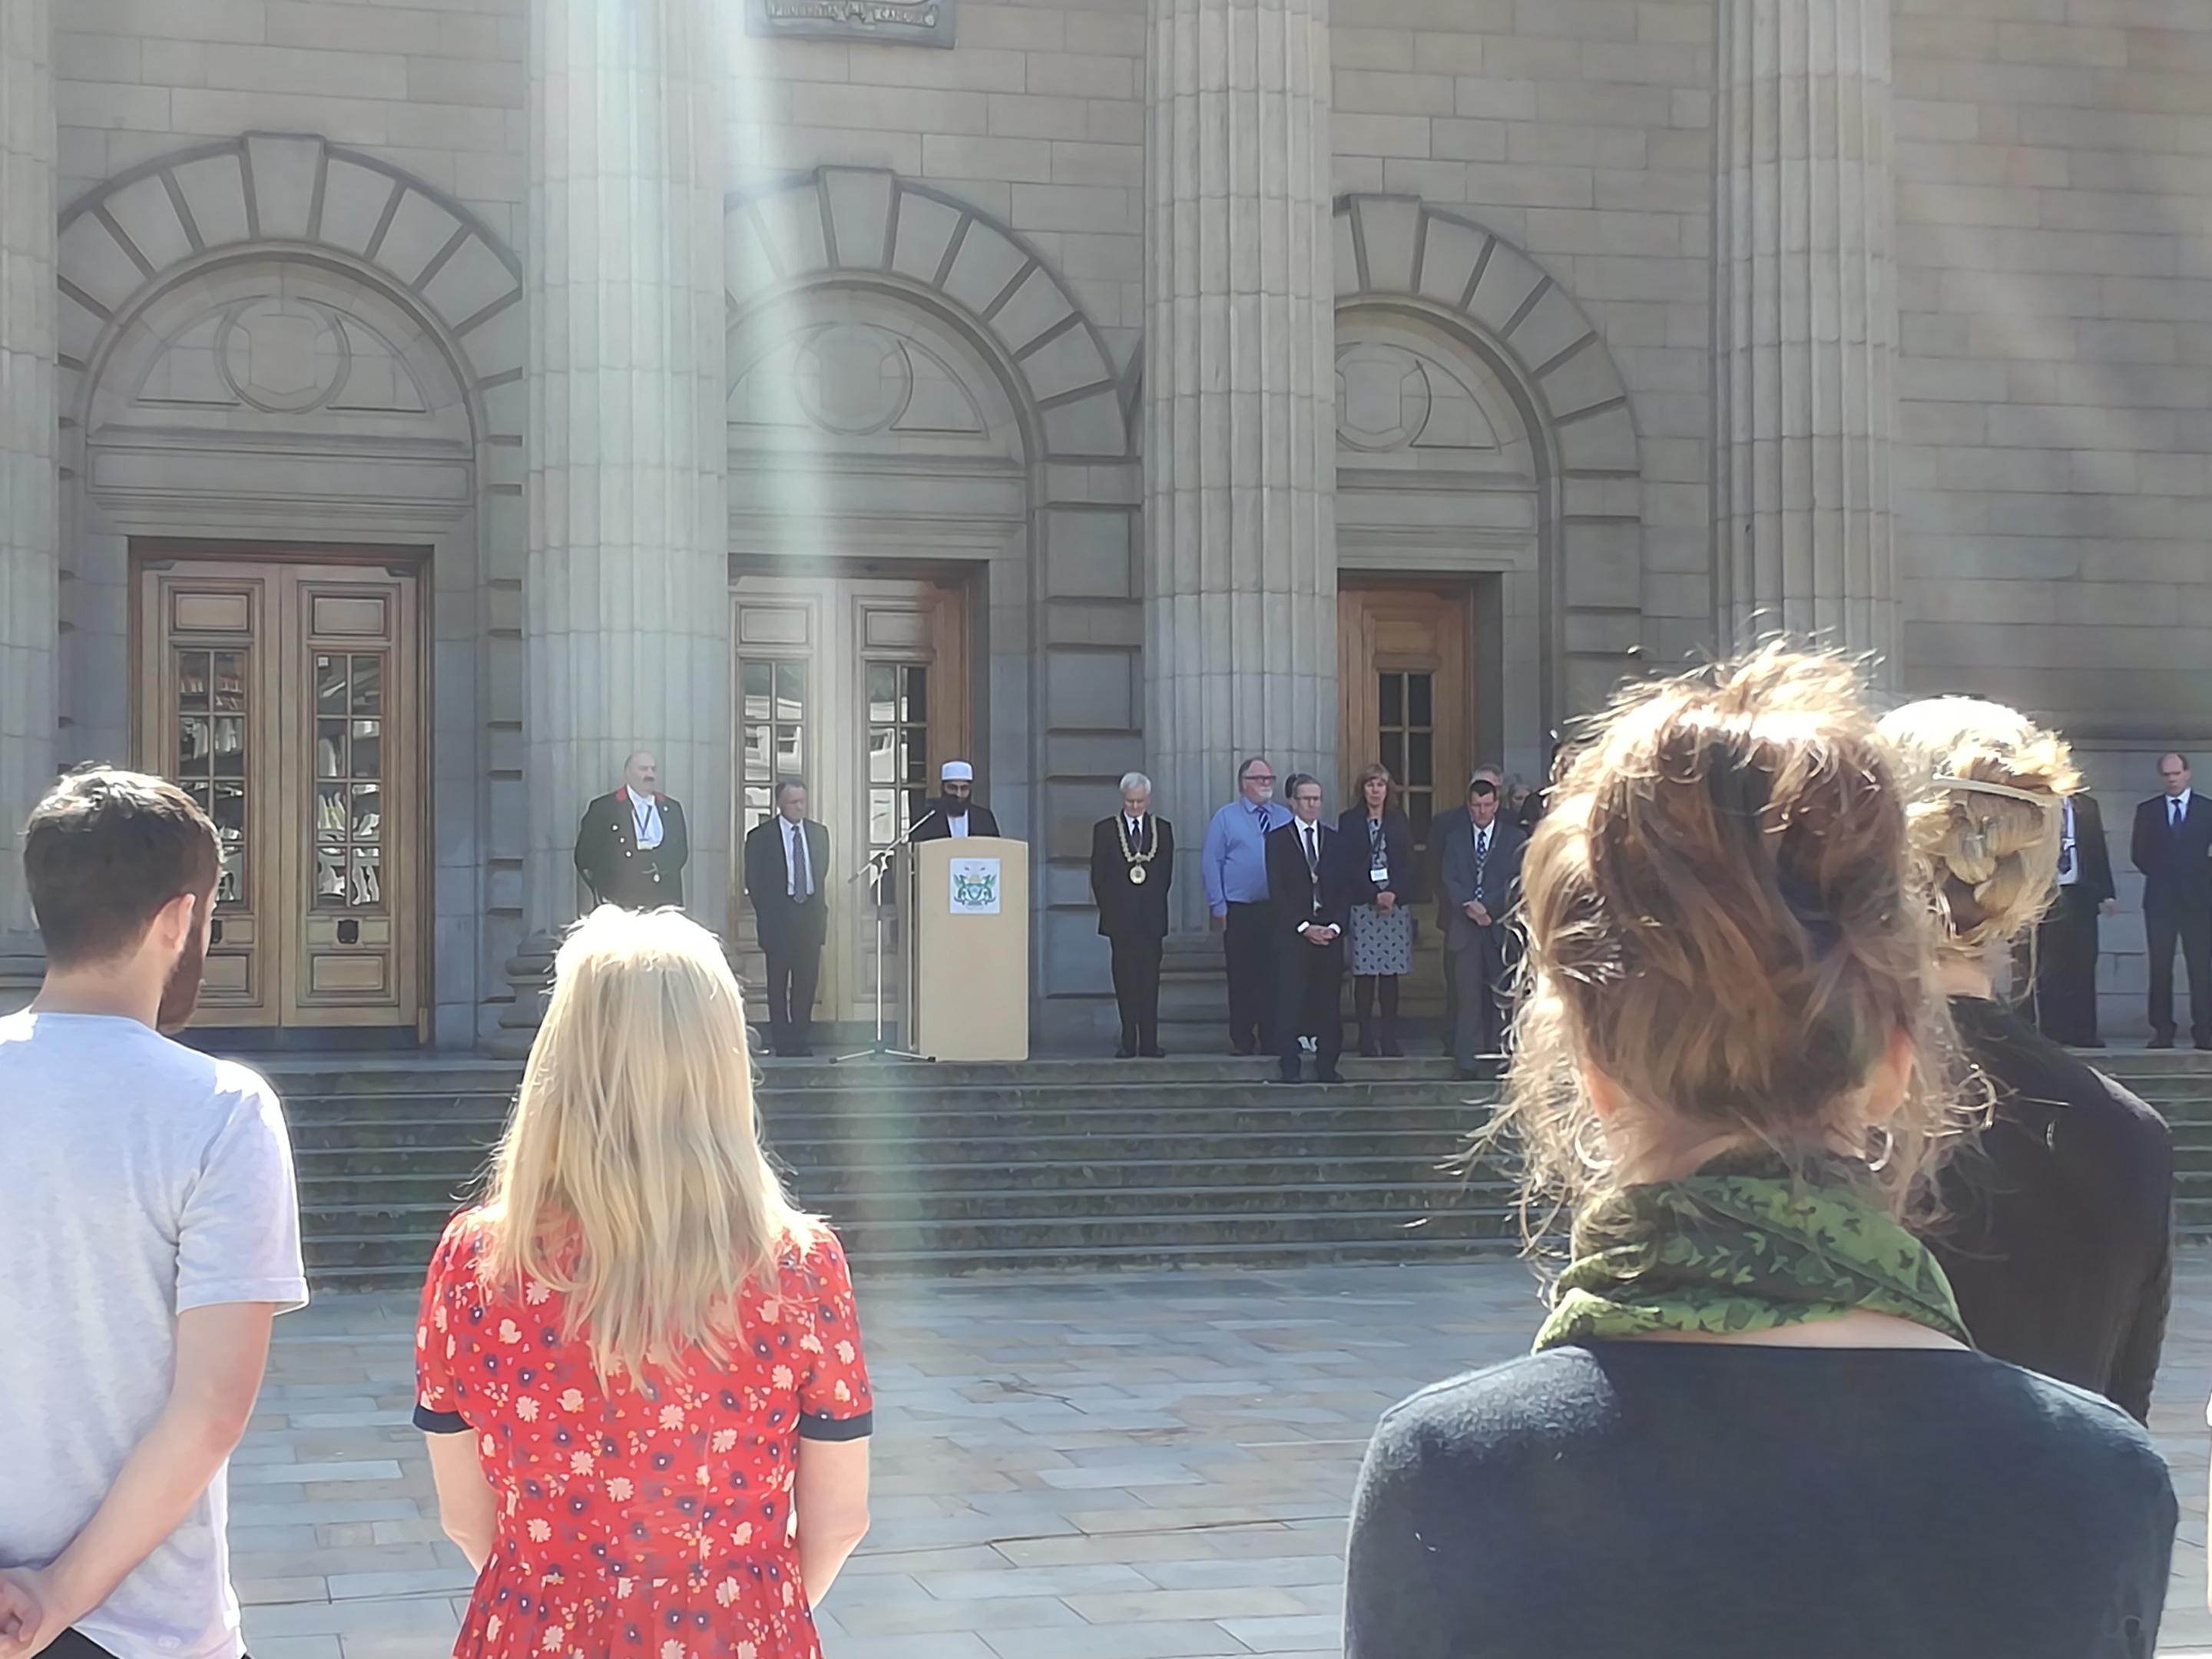 Minute's silence for Grenfell Tower victims is held in Dundee.